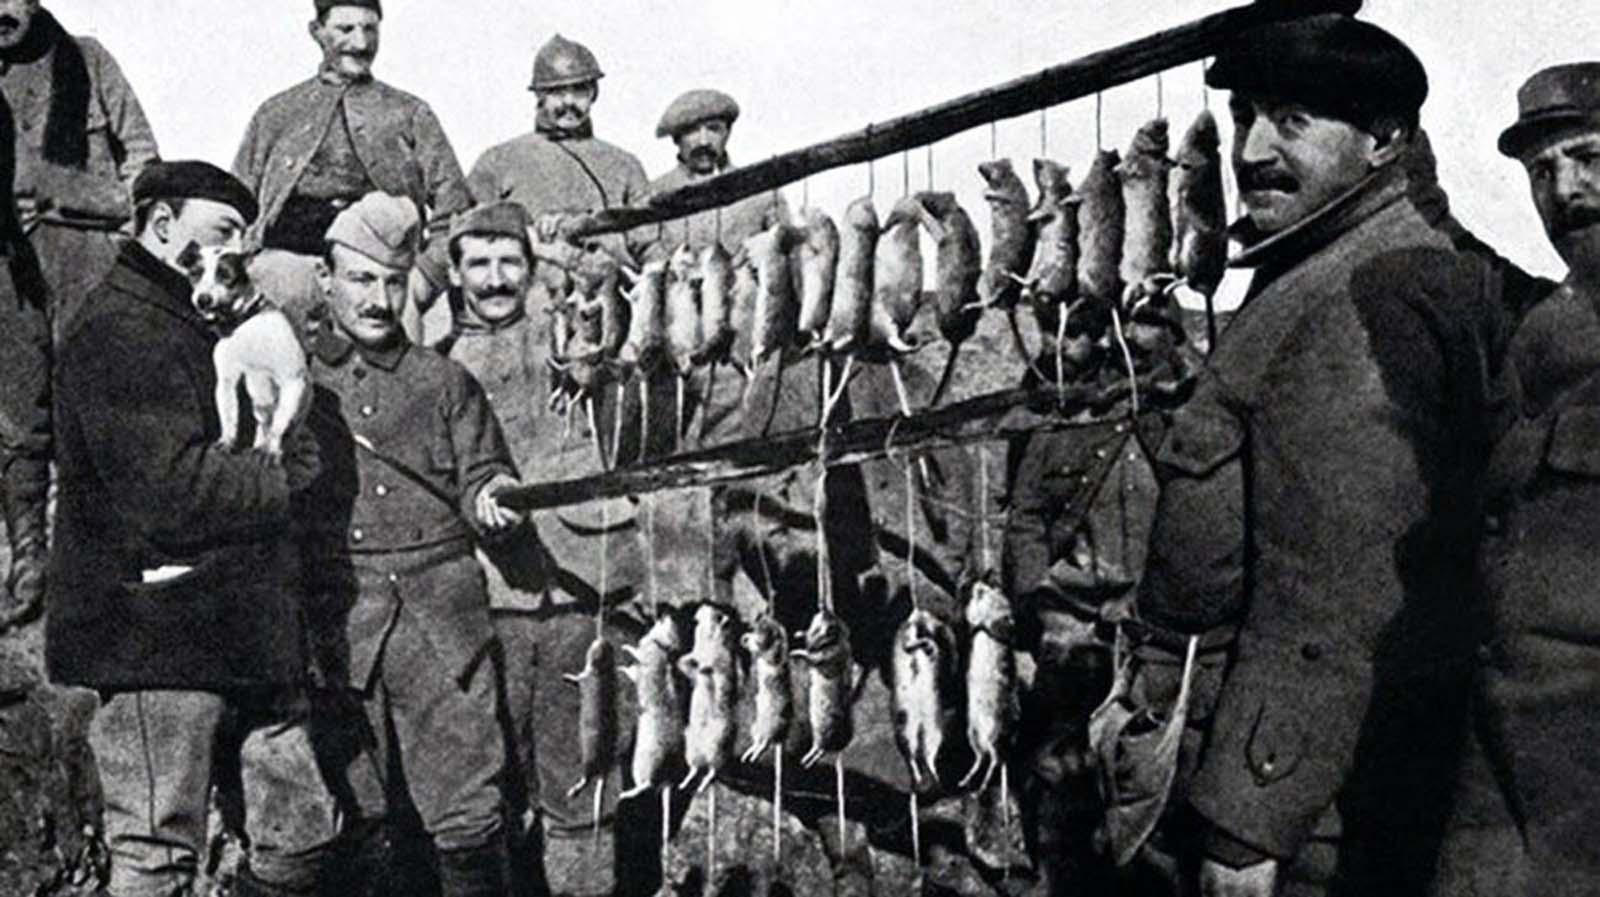 The result of 15 minute’s rat-hunting in a French trench. Note the Jack Russell Terrier in the gentleman’s arms at left.